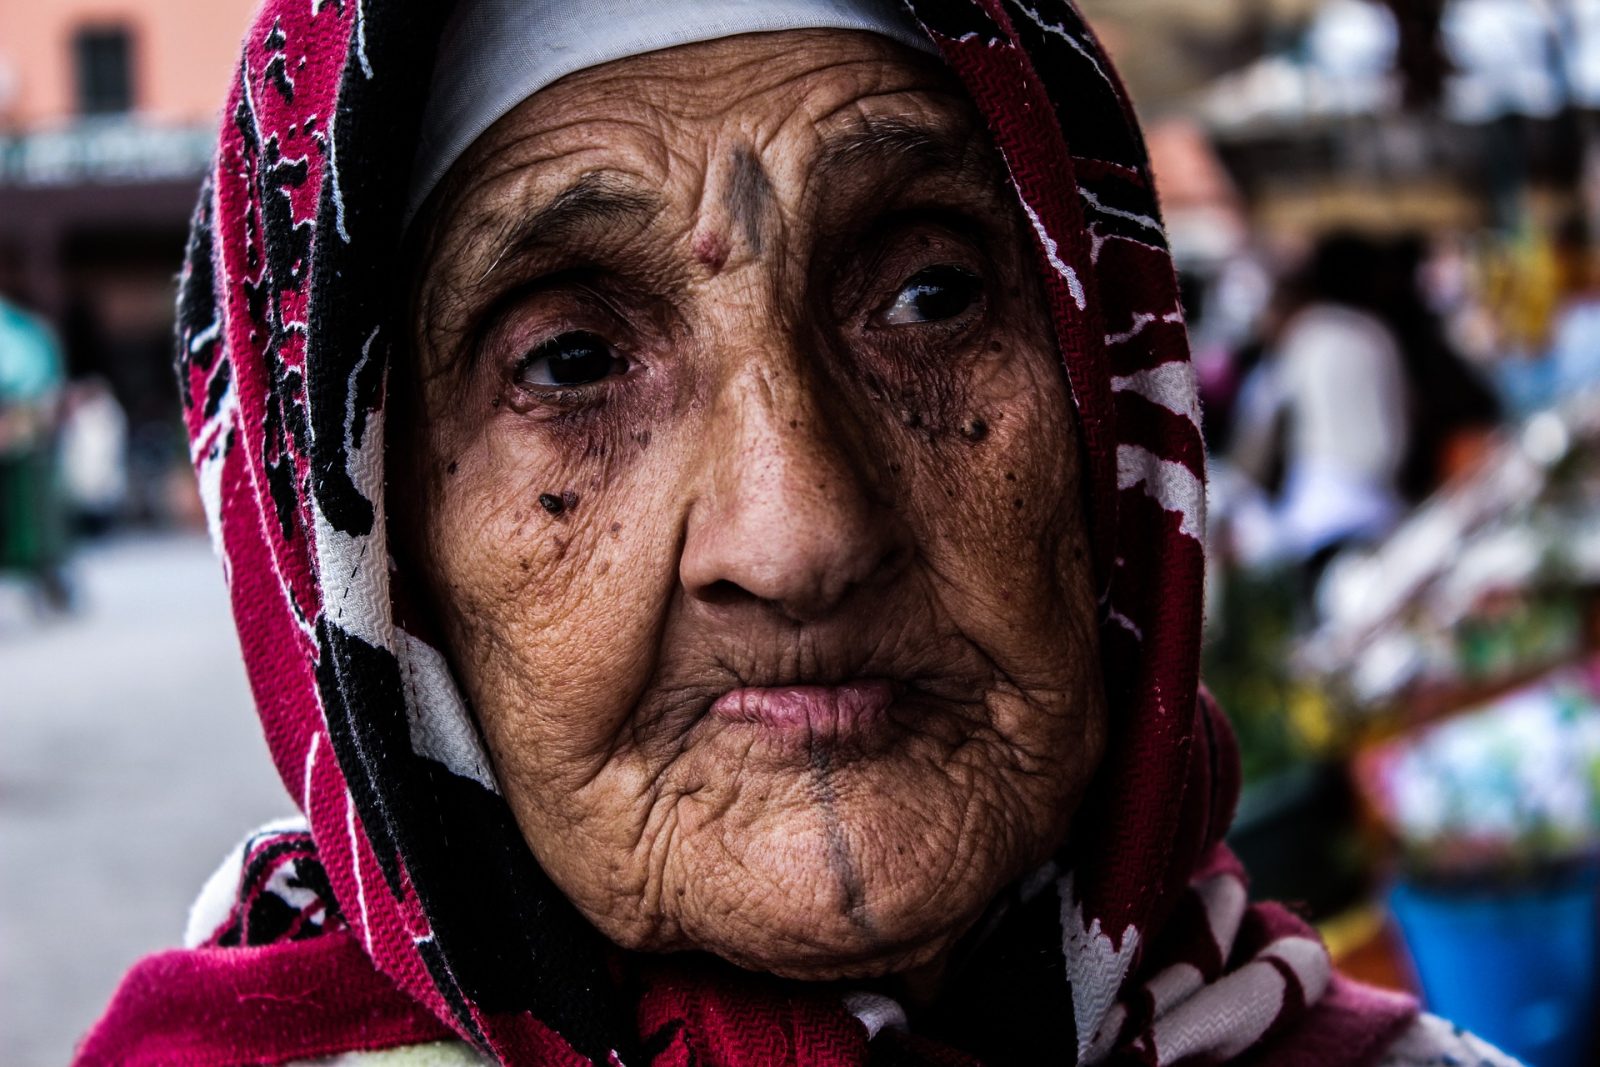 old woman Face Tattoo Pixabay